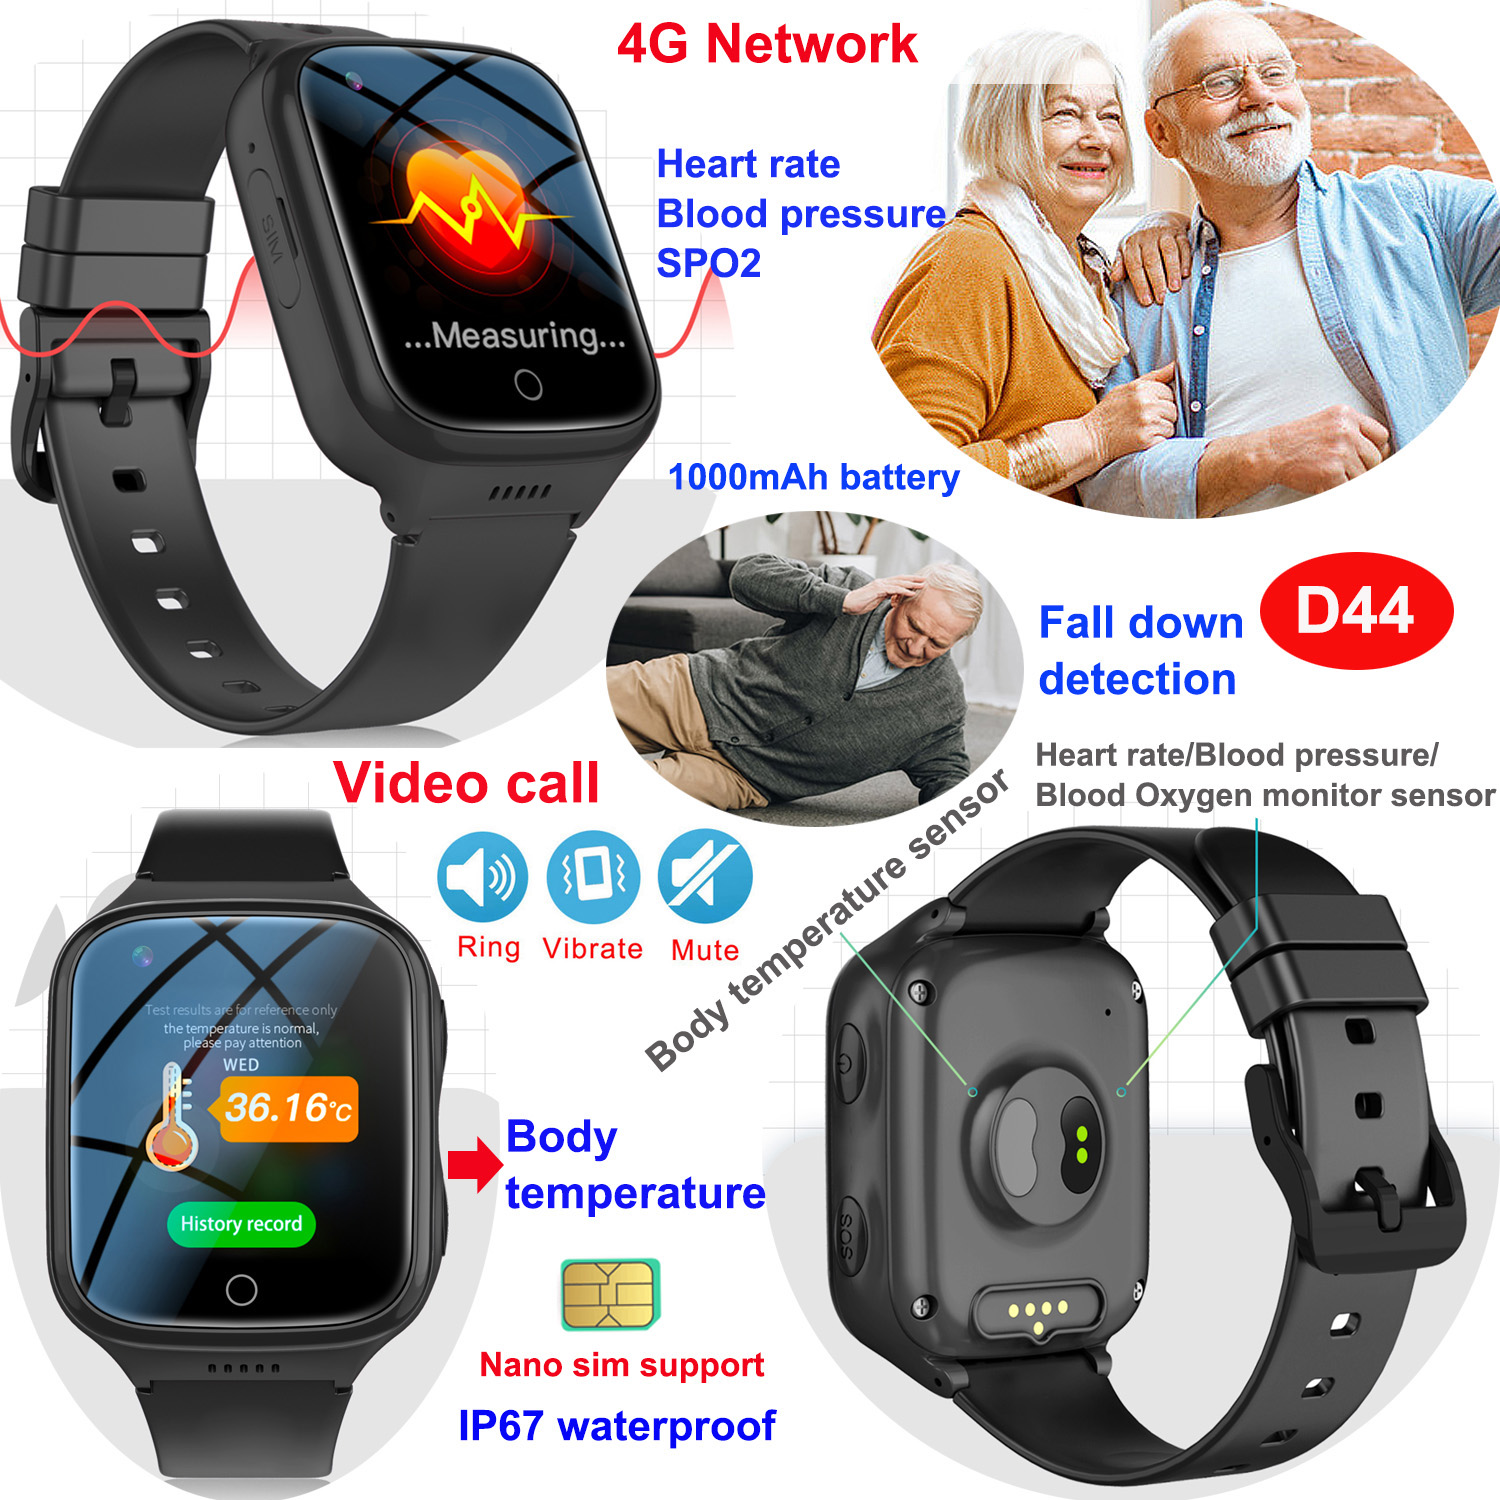 Latest 4G network Video call IP67 water resistance senior healthcare Wearable GPS Tracker with accurate positioning heart rate body temperature D44